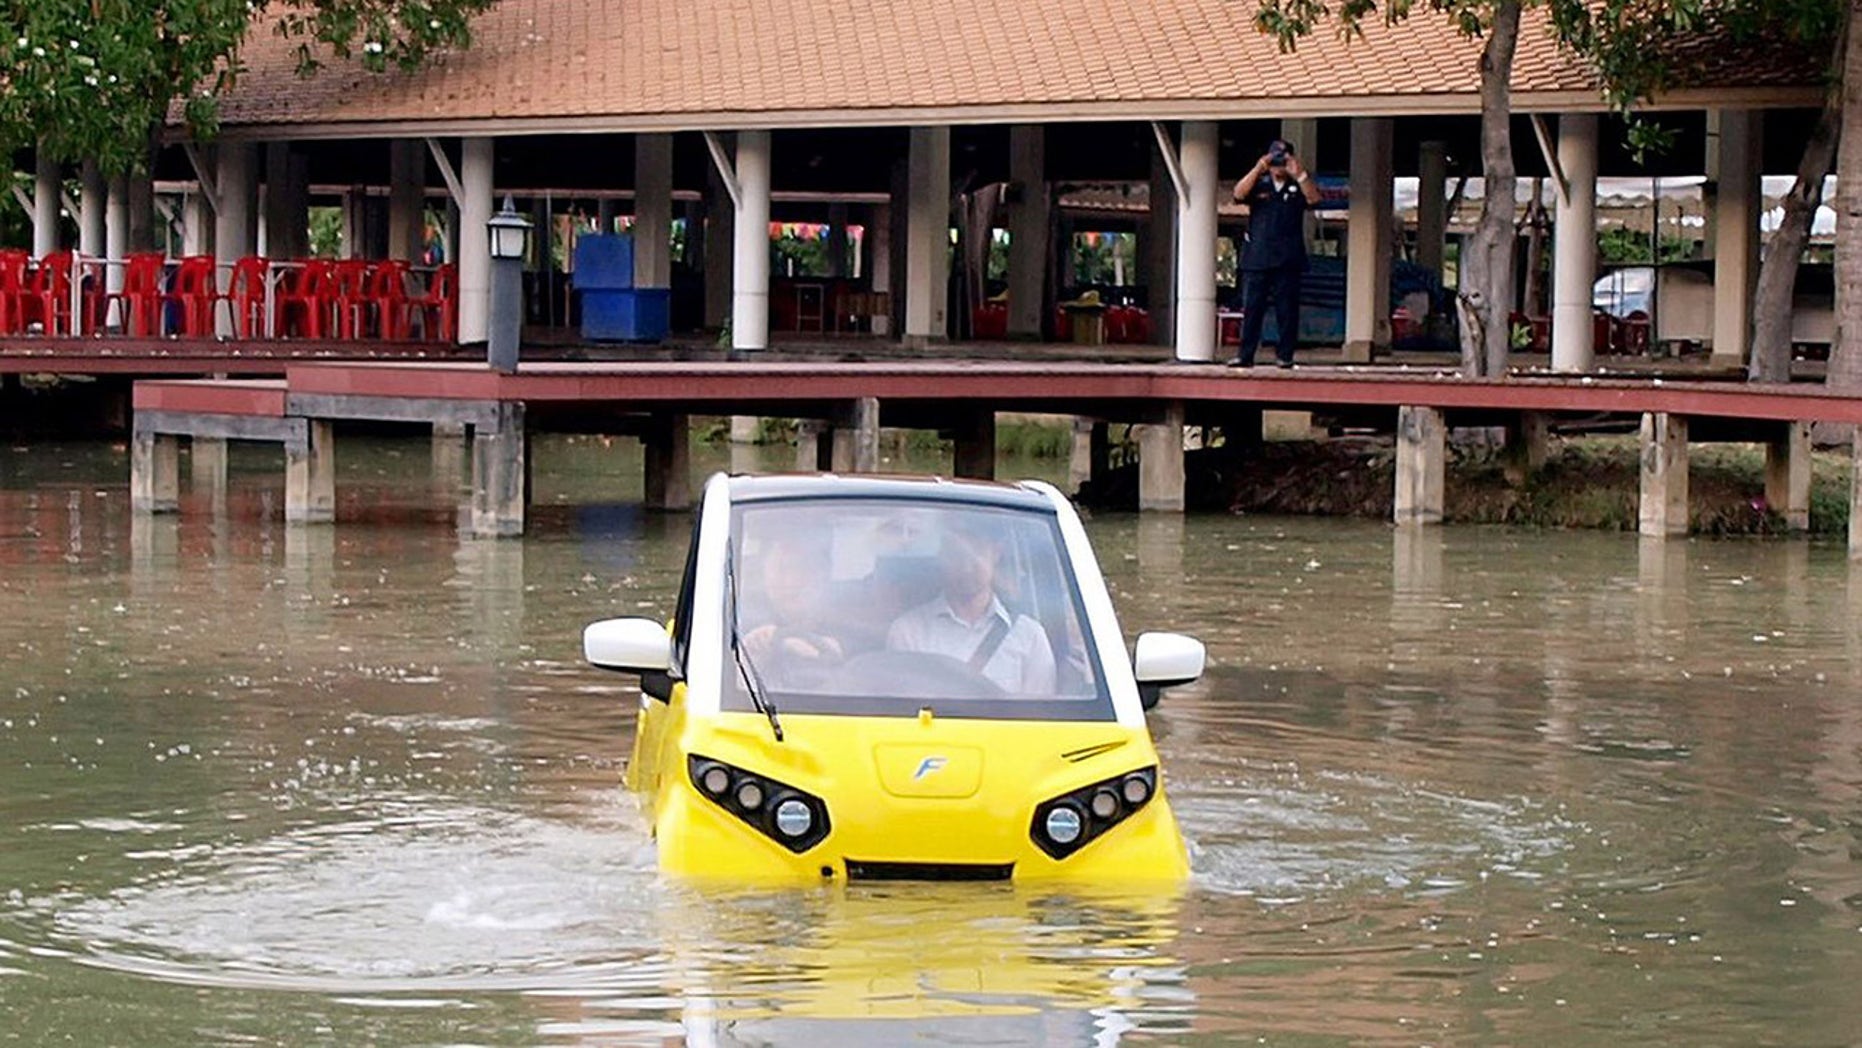 Tsunami-inspired floating car on sale in Thailand